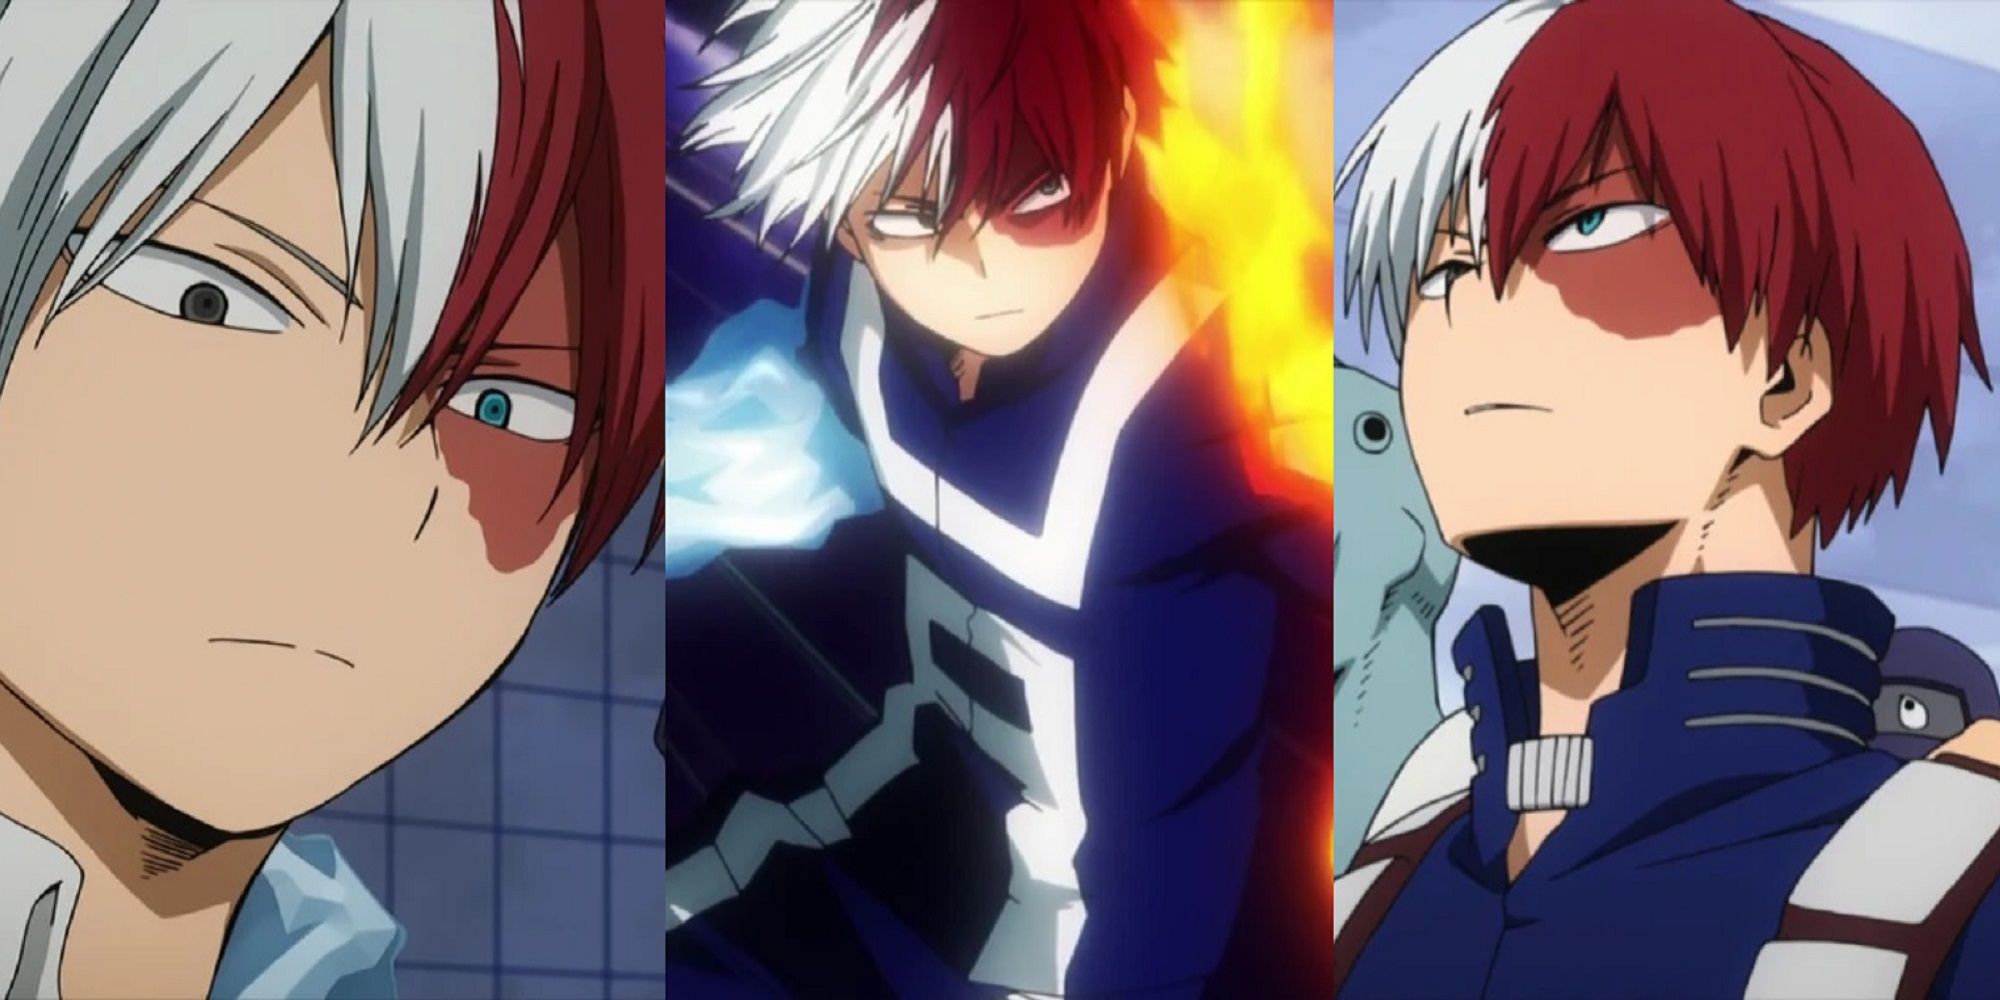 Split image of Shoto Todoroki at the USJ, using his fire and ice powers, and during the Hero License Exam in the My Hero Academia anime